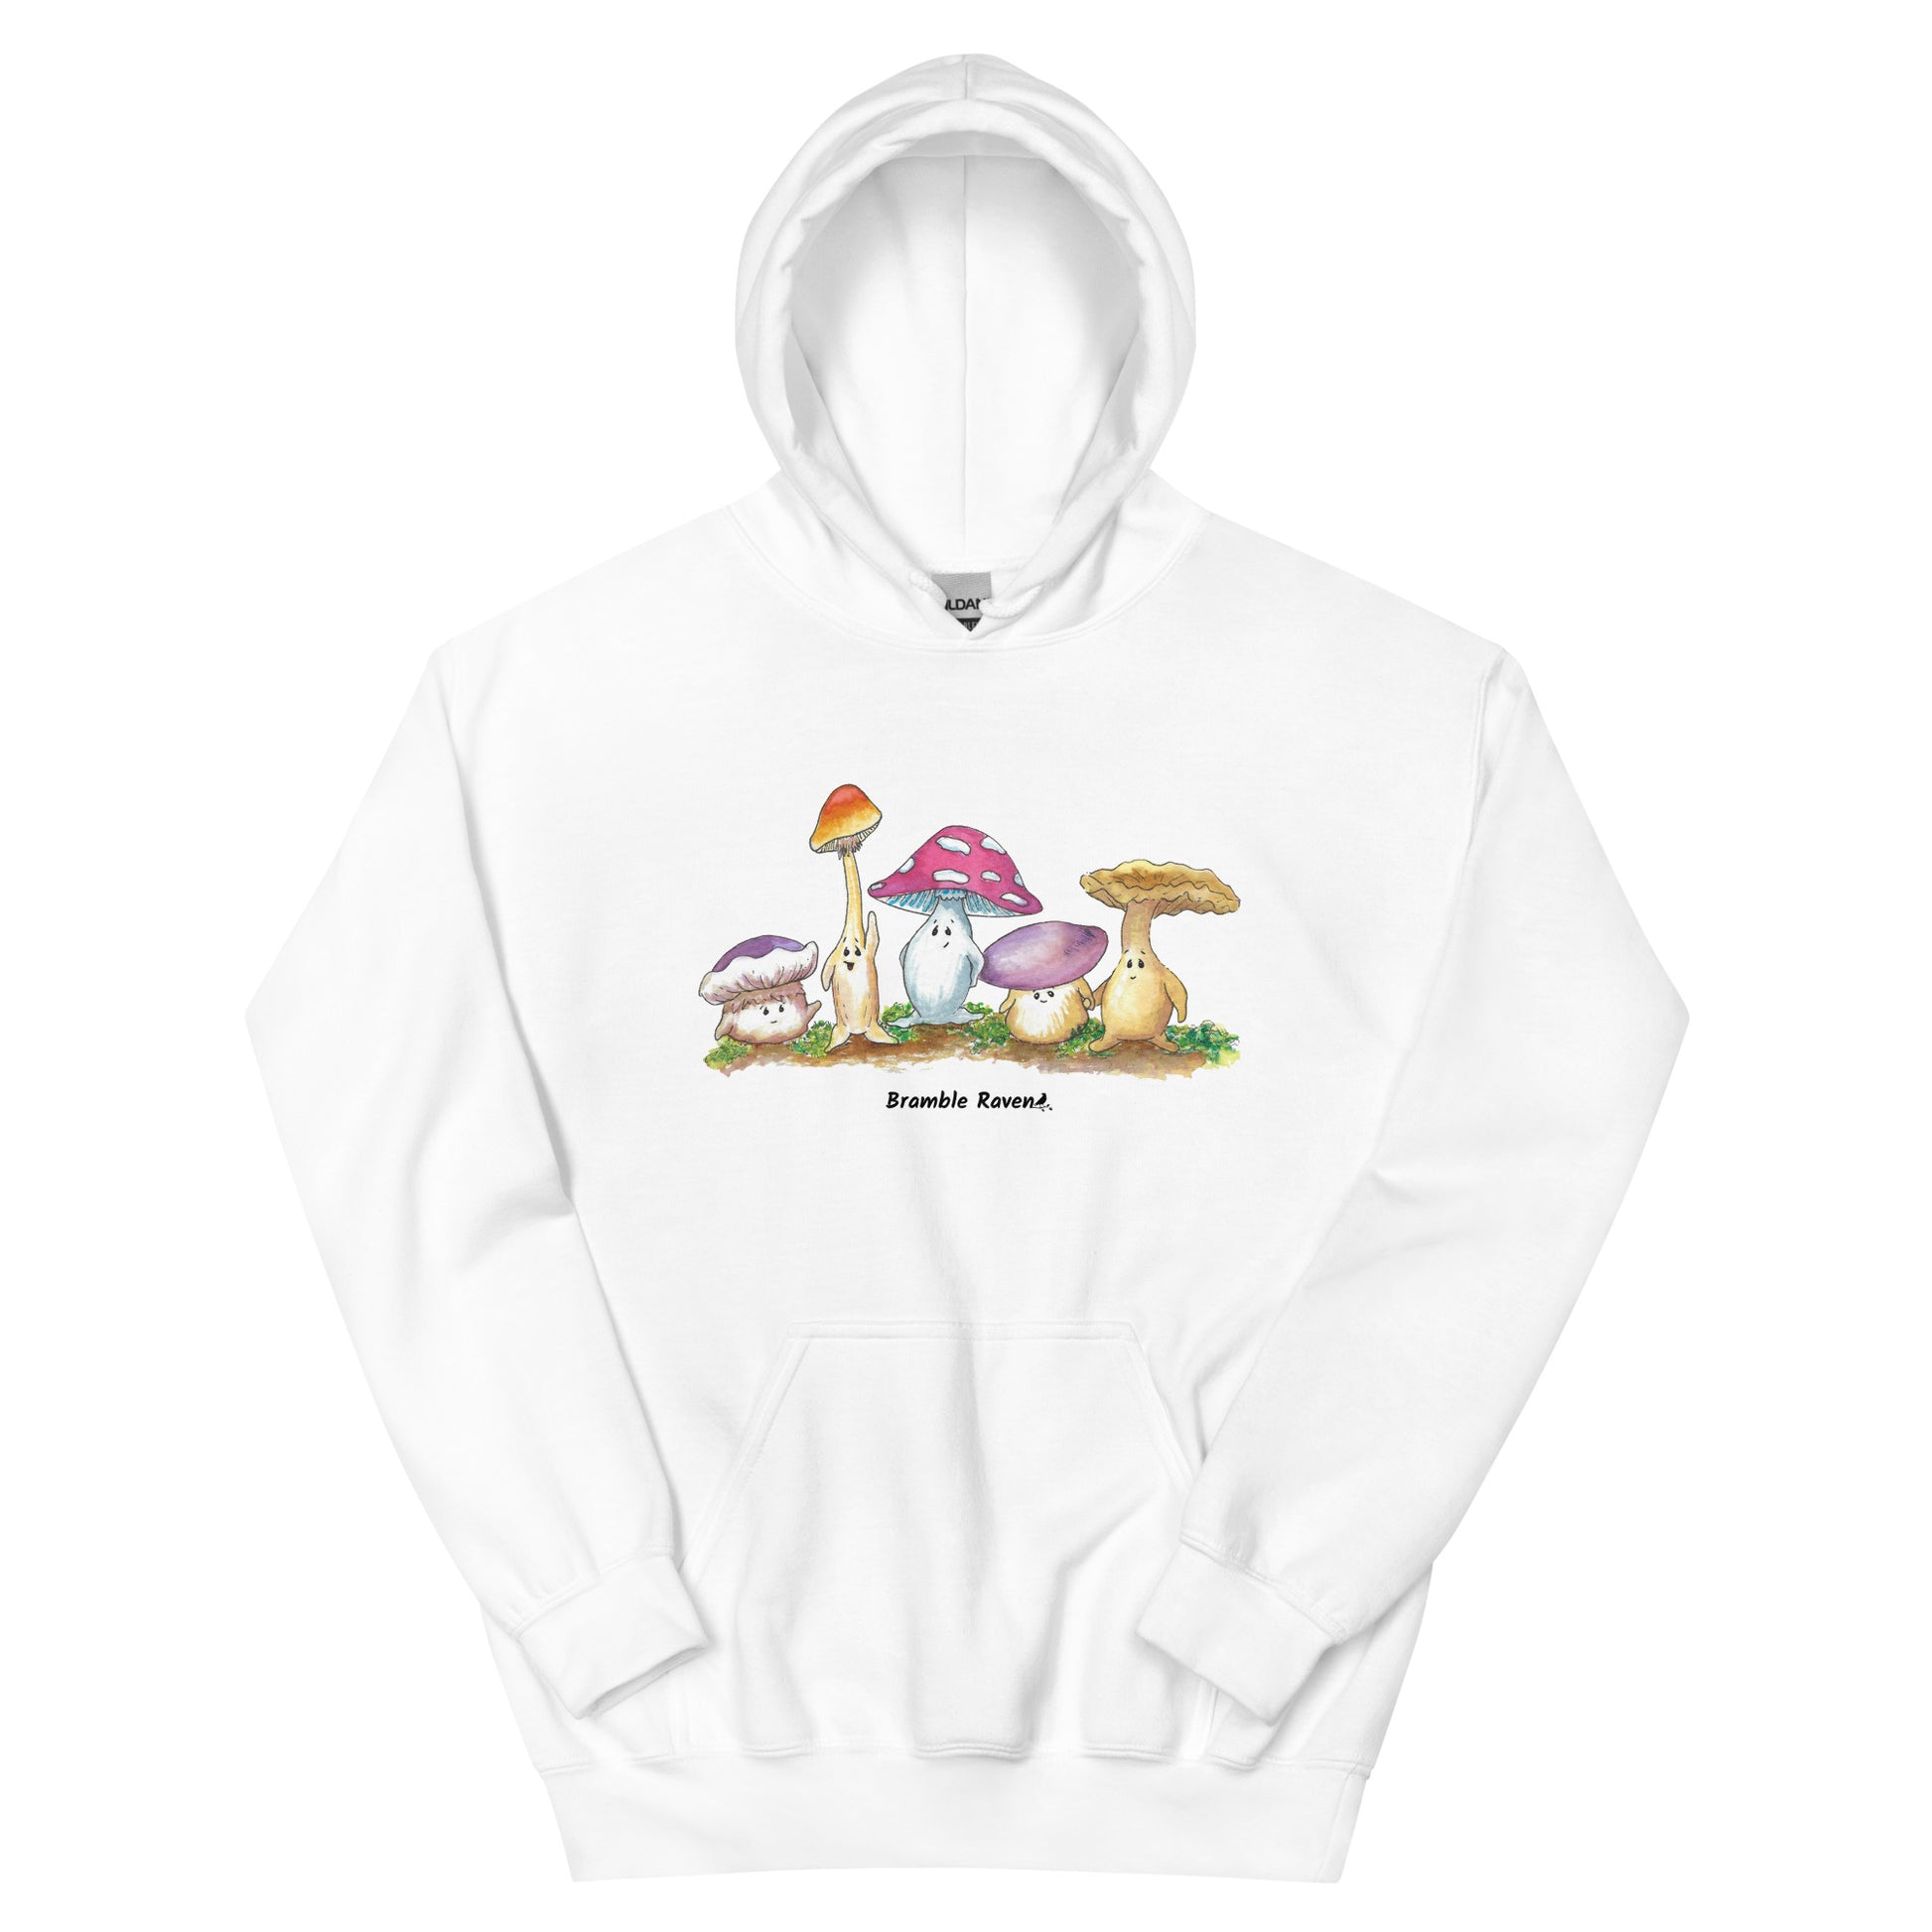 White colored unisex cotton/polyester blend hoodie. Features front design of Mushy and his whimsical mushroom friends. Hoodie has double lined hood, front pouch pocket, rib knit cuffs and stretchy waistband.